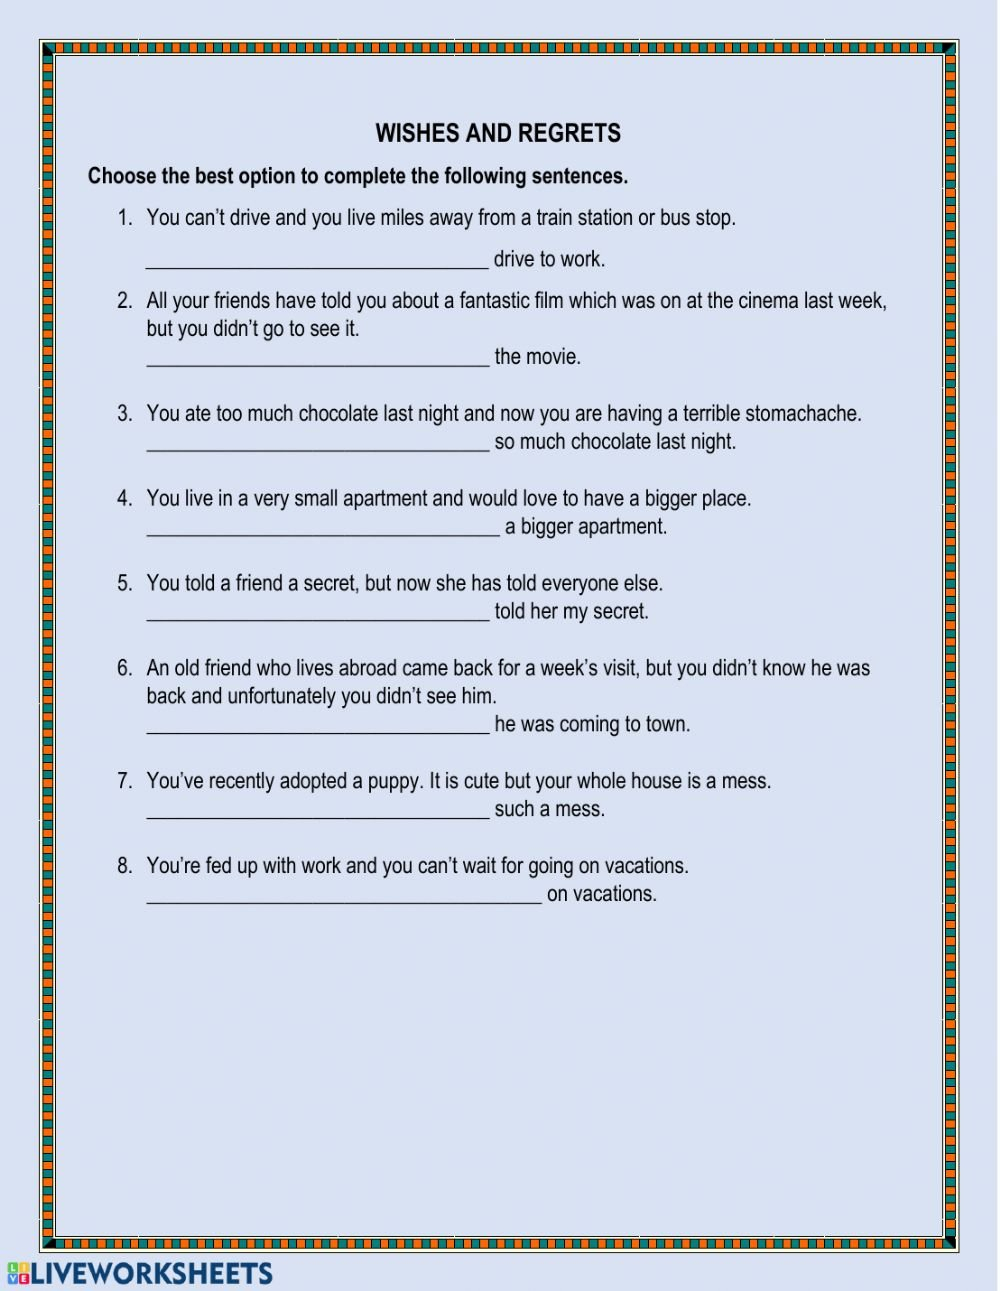 Wishes And Regrets  Interactive Worksheet For 5 Wishes Worksheet